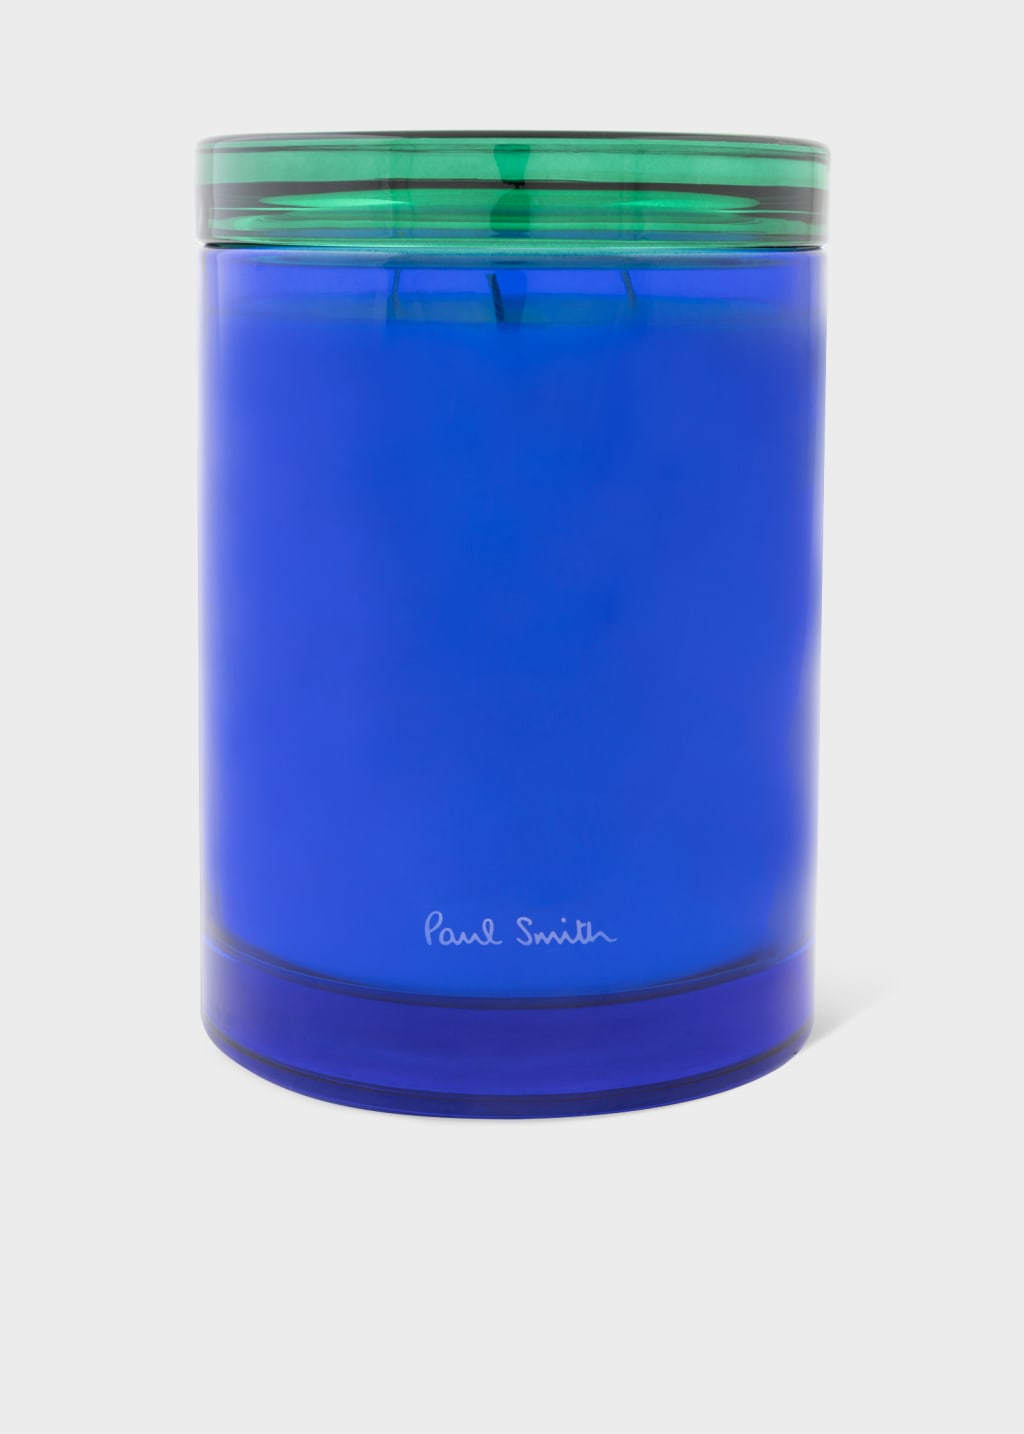 Front View - Paul Smith Early Bird 3-Wick Scented Candle, 1000g Paul Smith